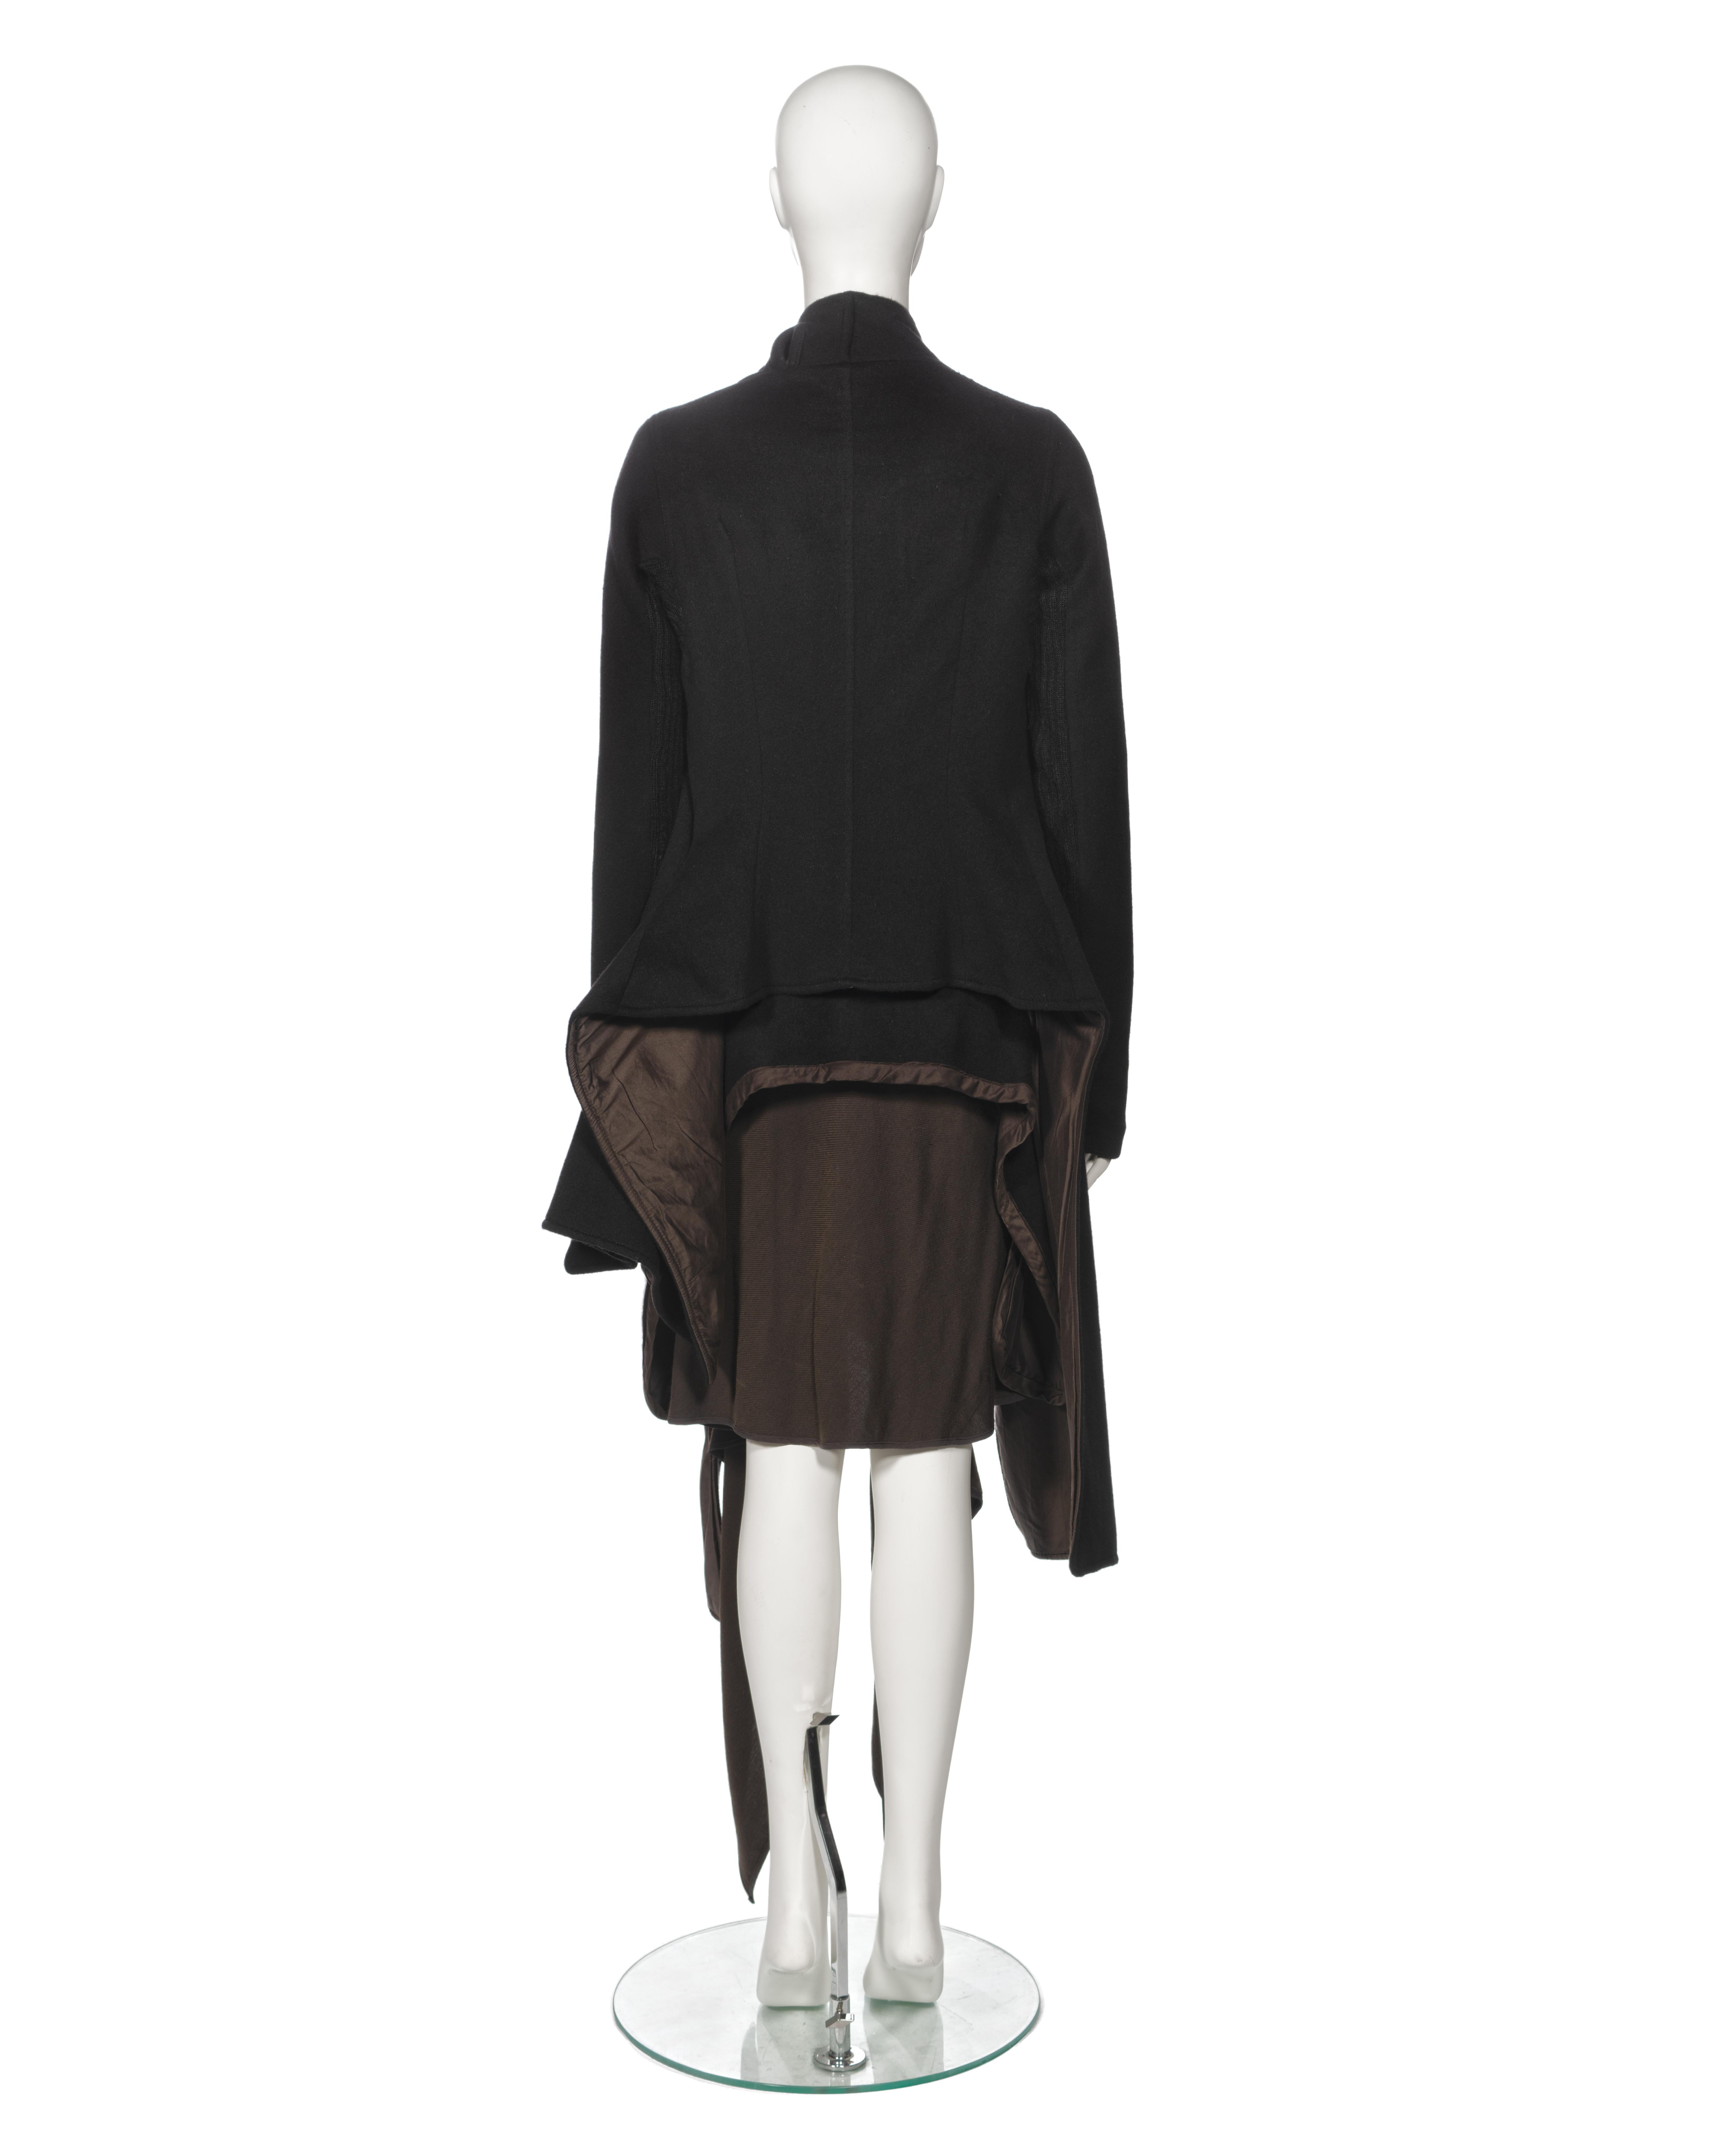 Rick Owens Angora Jacket and Cashmere Skirt 'Queen' Ensemble, fw 2004 For Sale 10